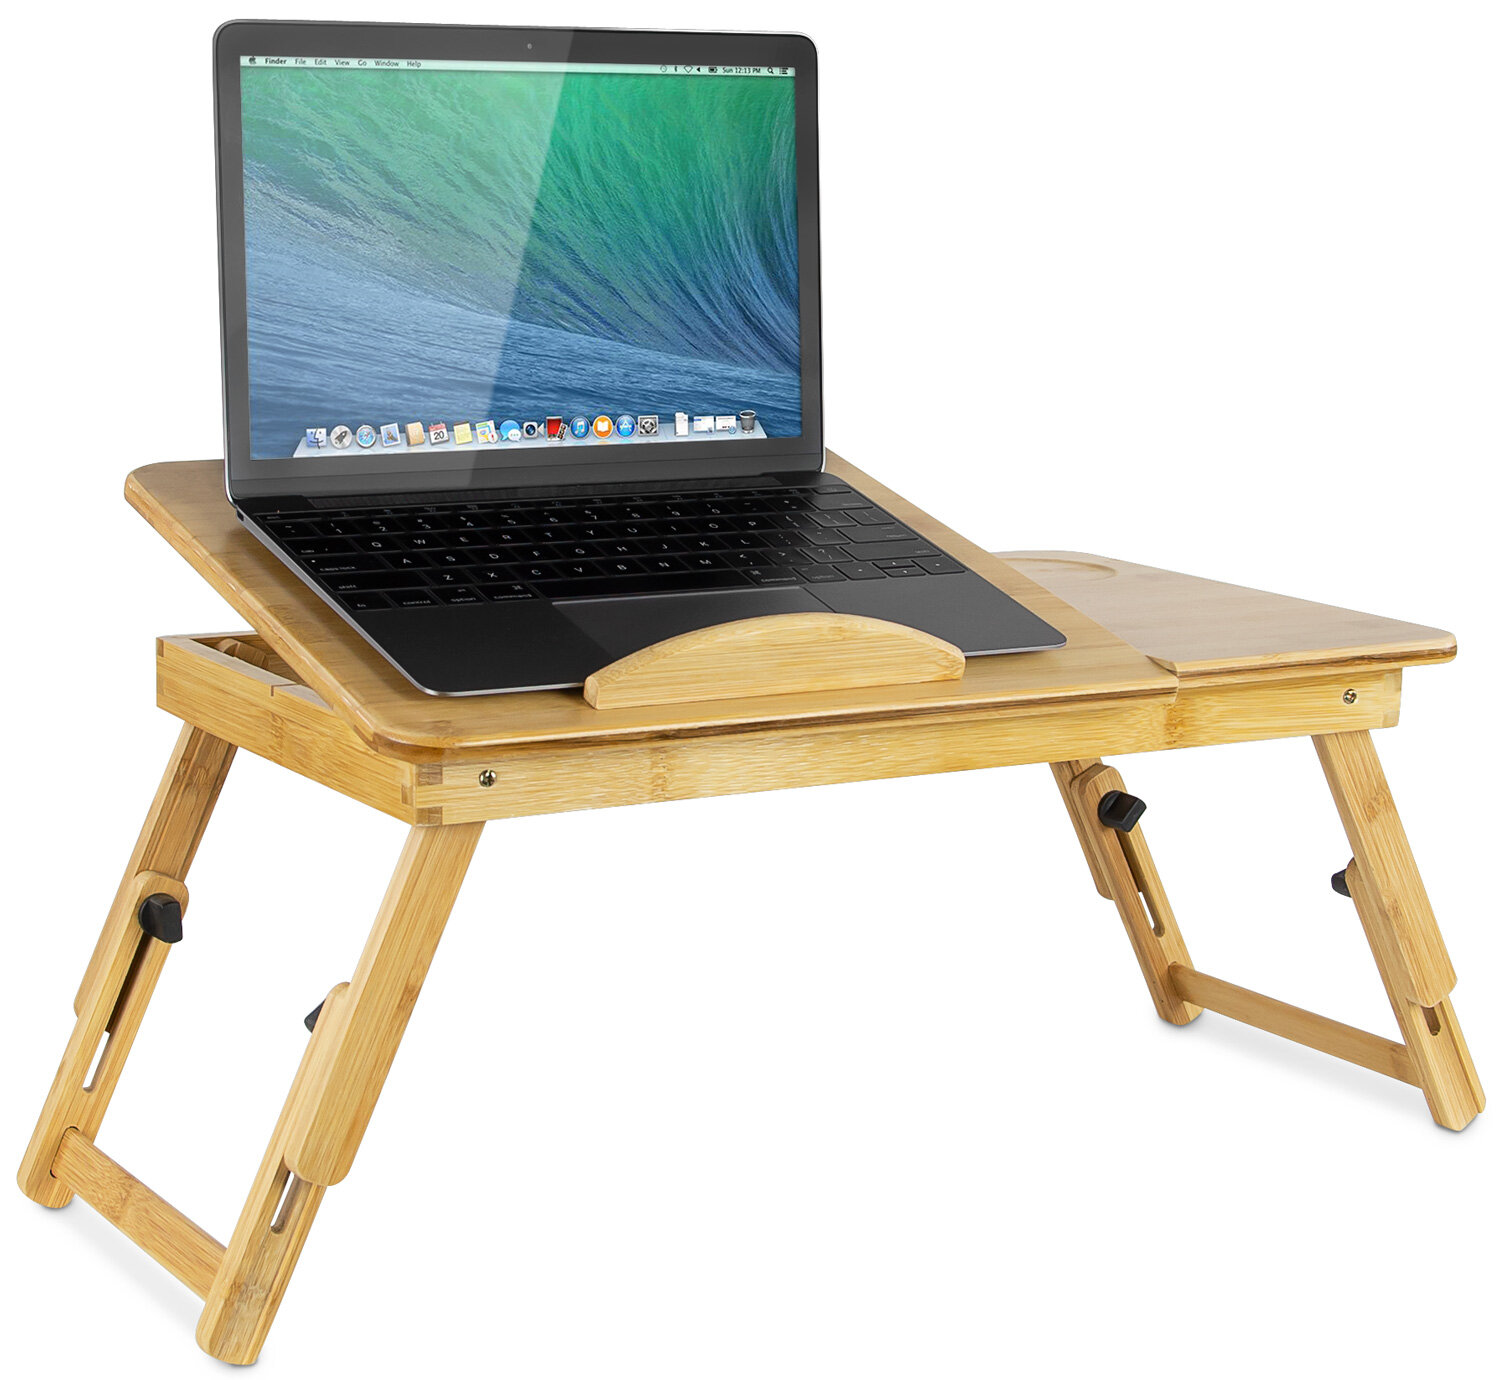 MI-7212 Mount-It Adjustable Breakfast Table with Foldable Design Laptop Bed Tray with Tilting Top and Pullout Storage Drawer Eco-Friendly and Natural Bamboo 